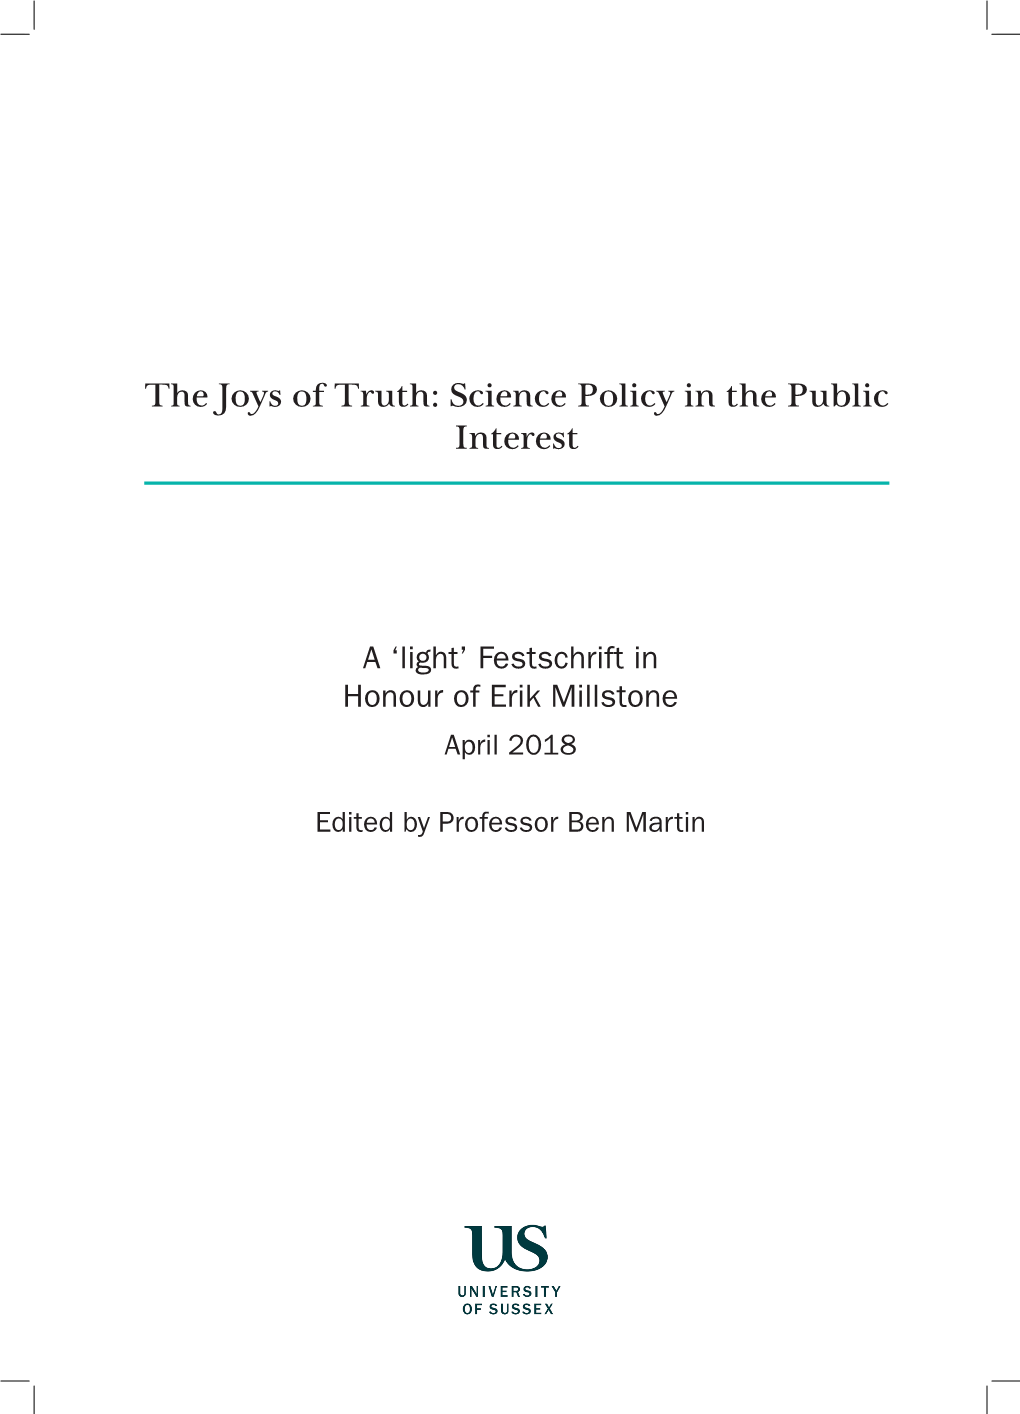 The Joys of Truth: Science Policy in the Public Interest